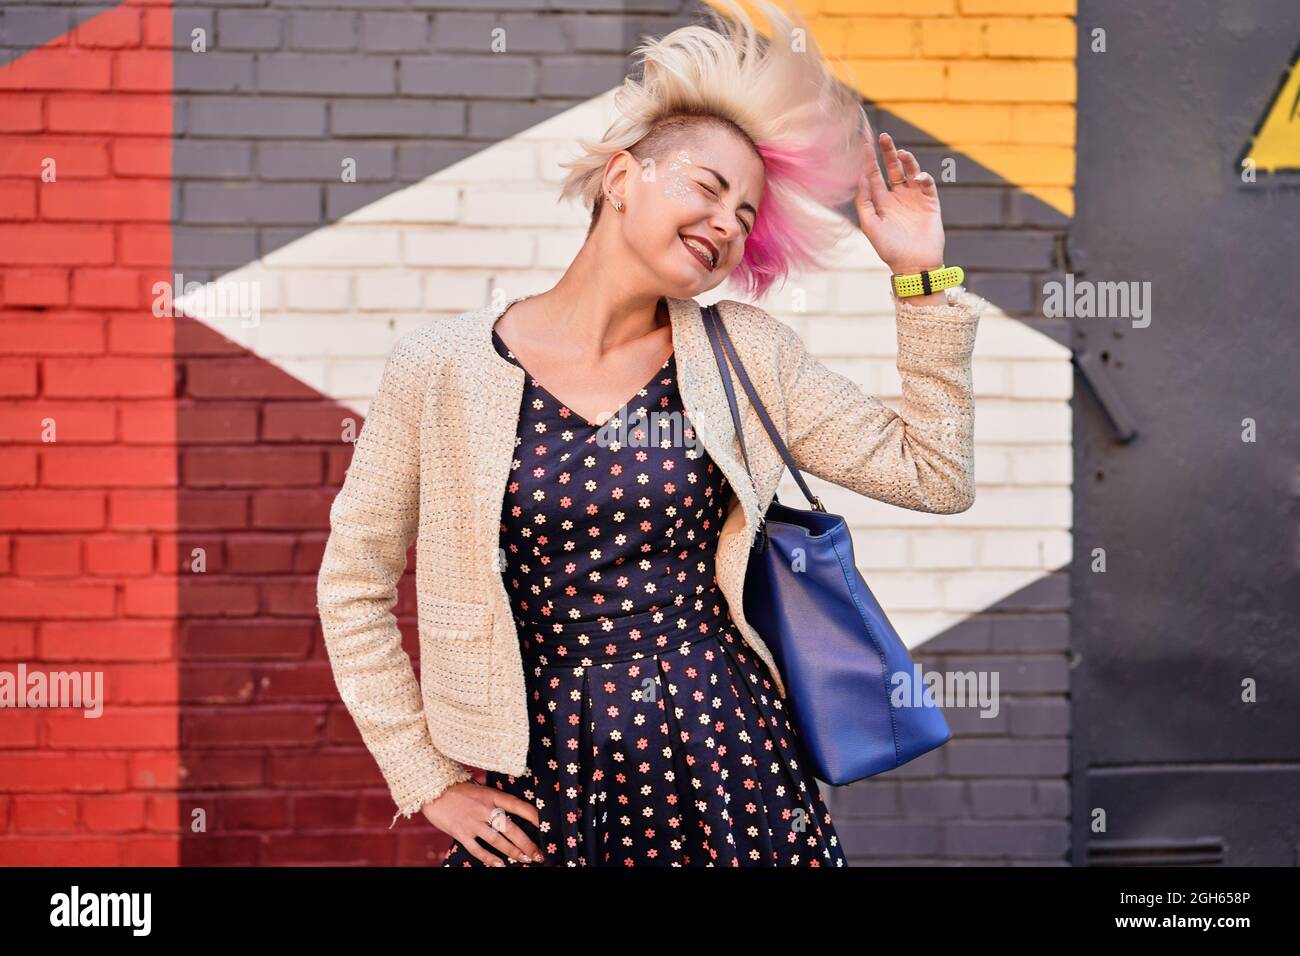 Carefree alternative female throwing dyed short hair against colorful wall in urban area Stock Photo